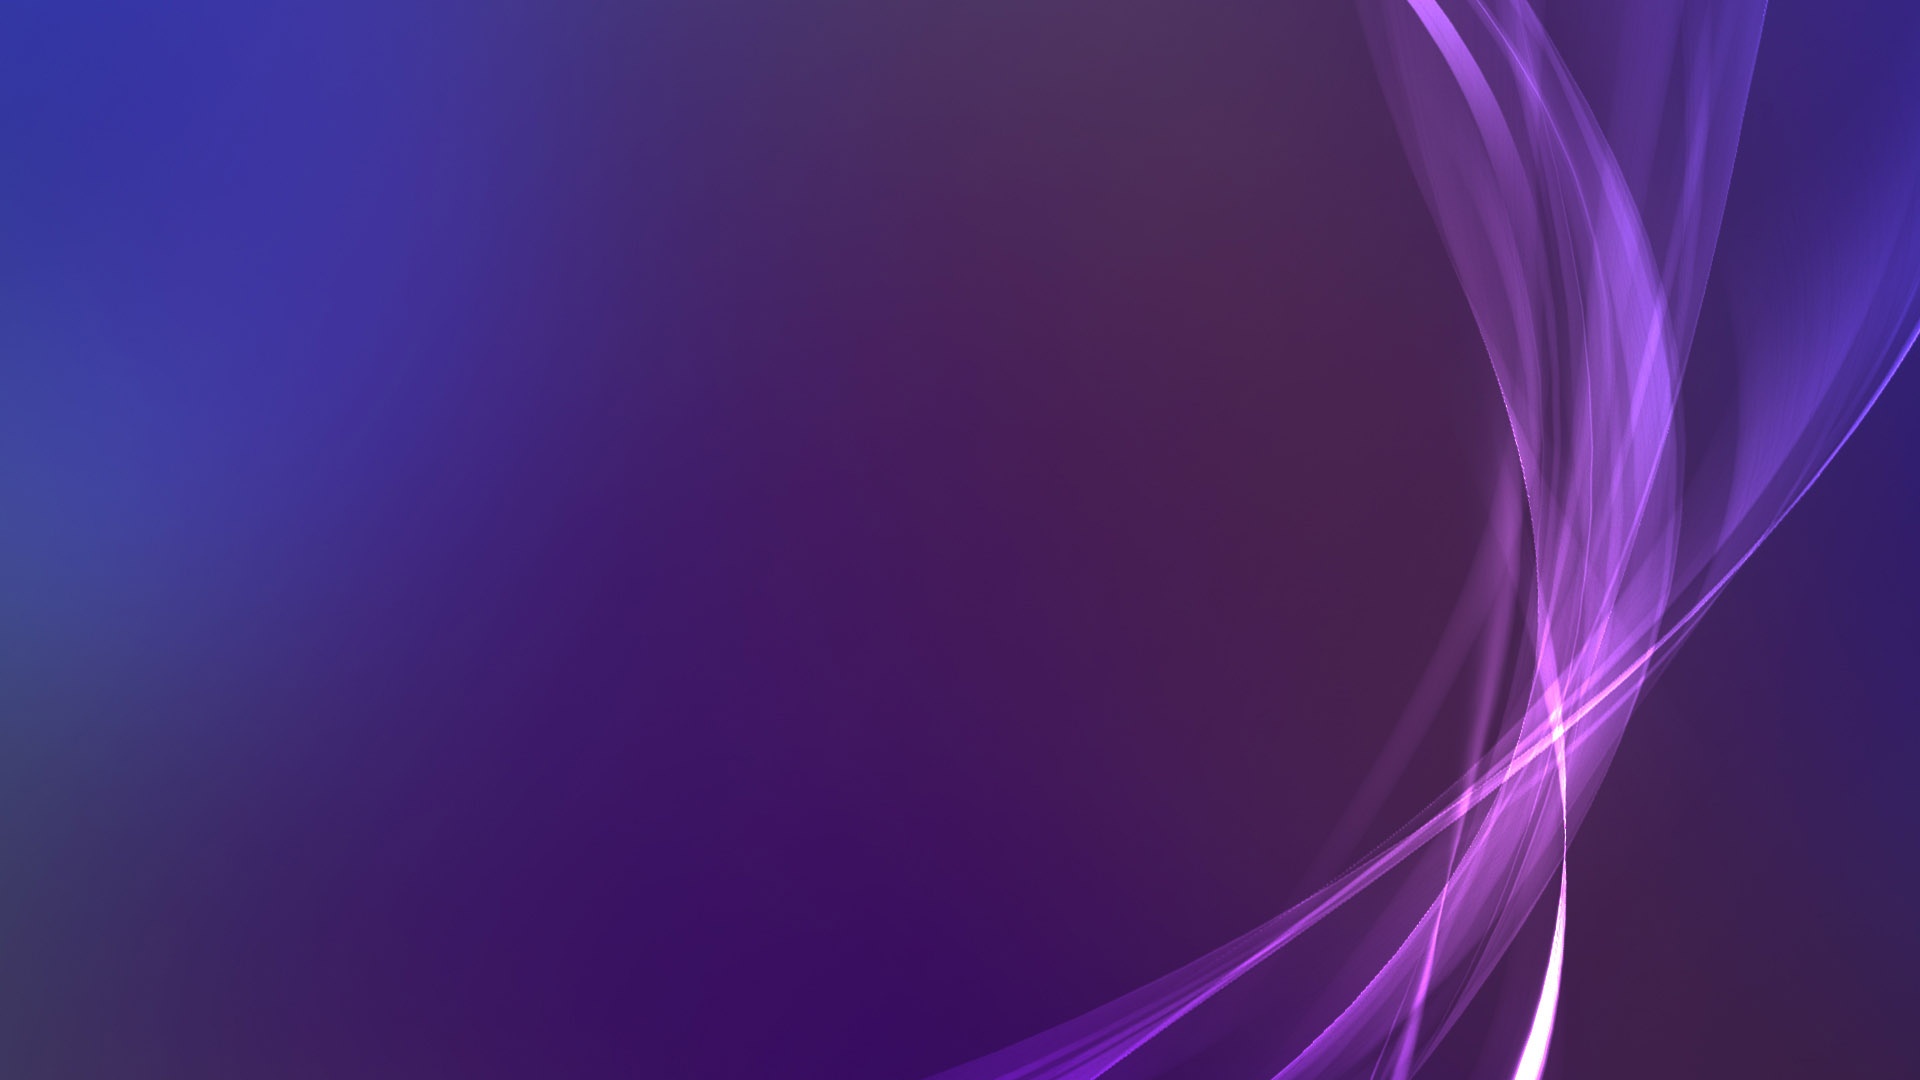 Purple Backround 1920x1080 HD Image Abstract 3D